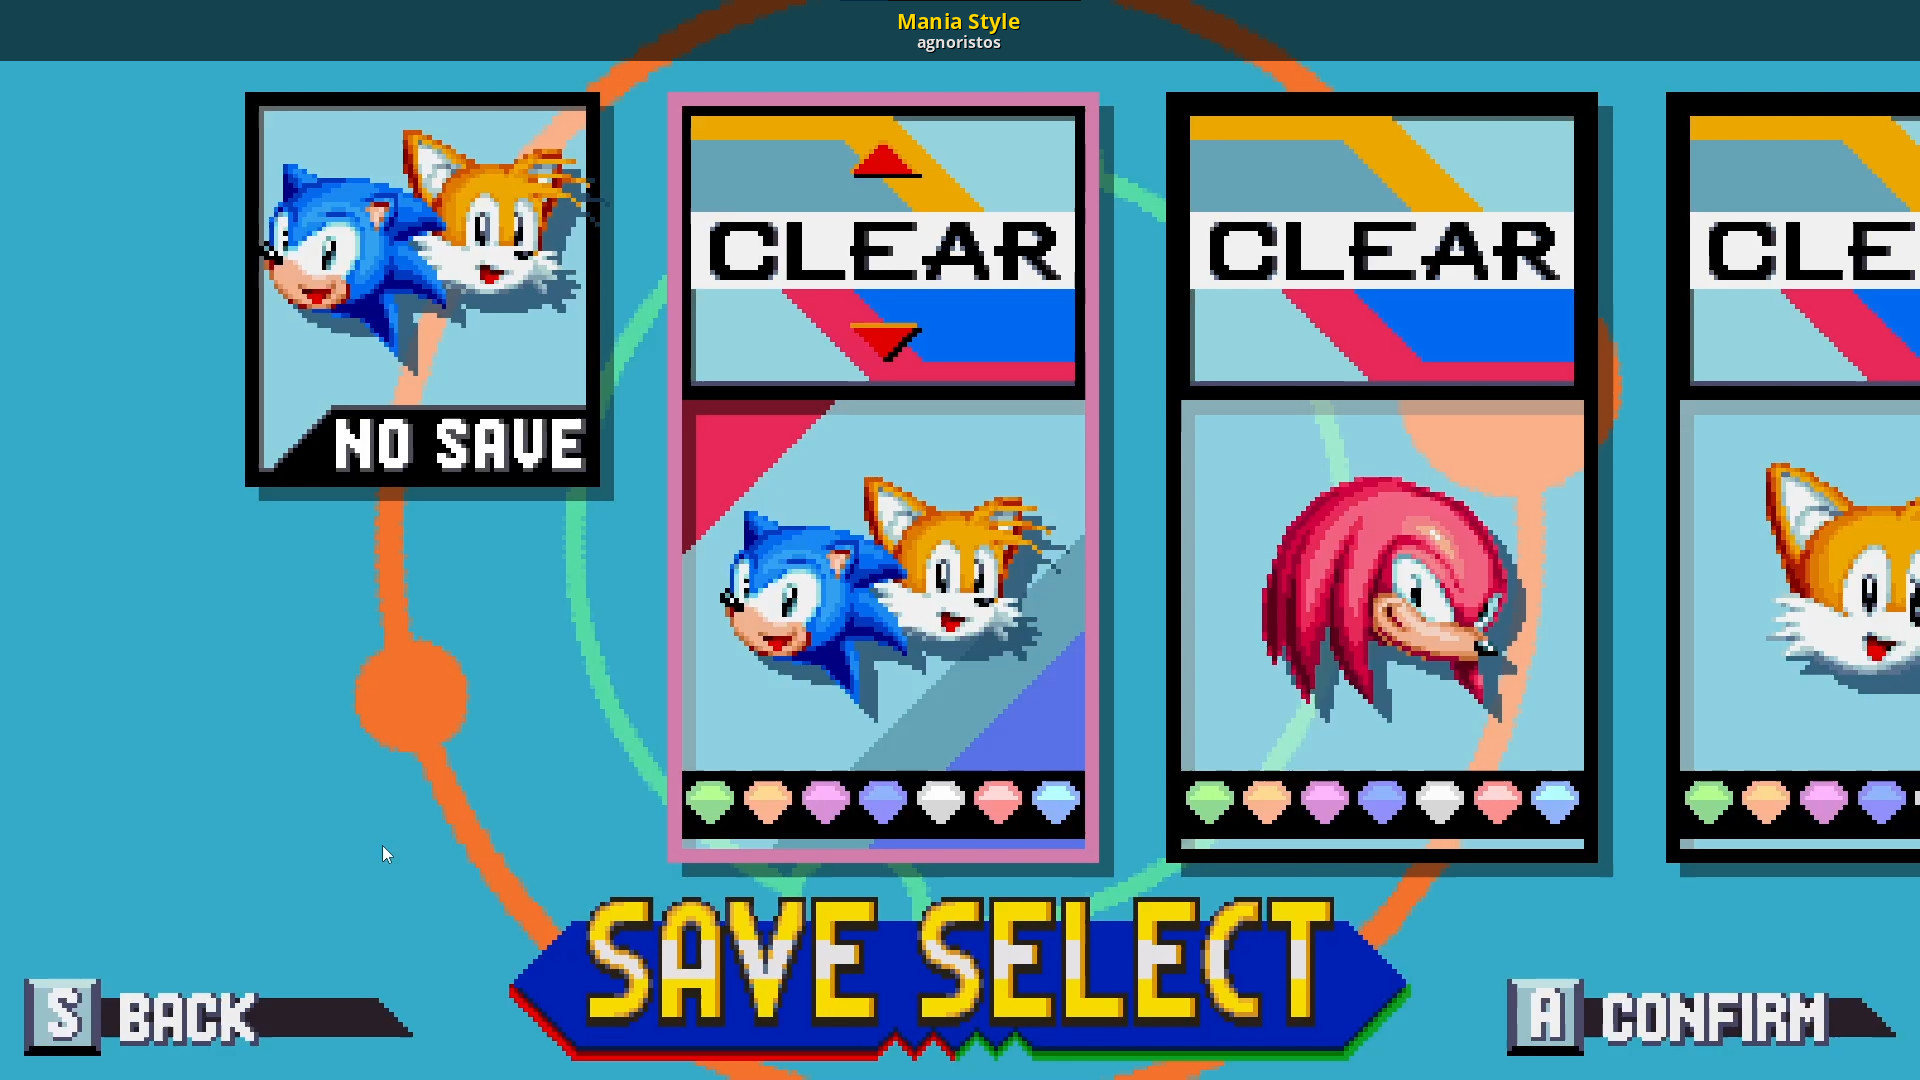 Sonic Blast on Game Jolt: Download Sonic Superstars on Android